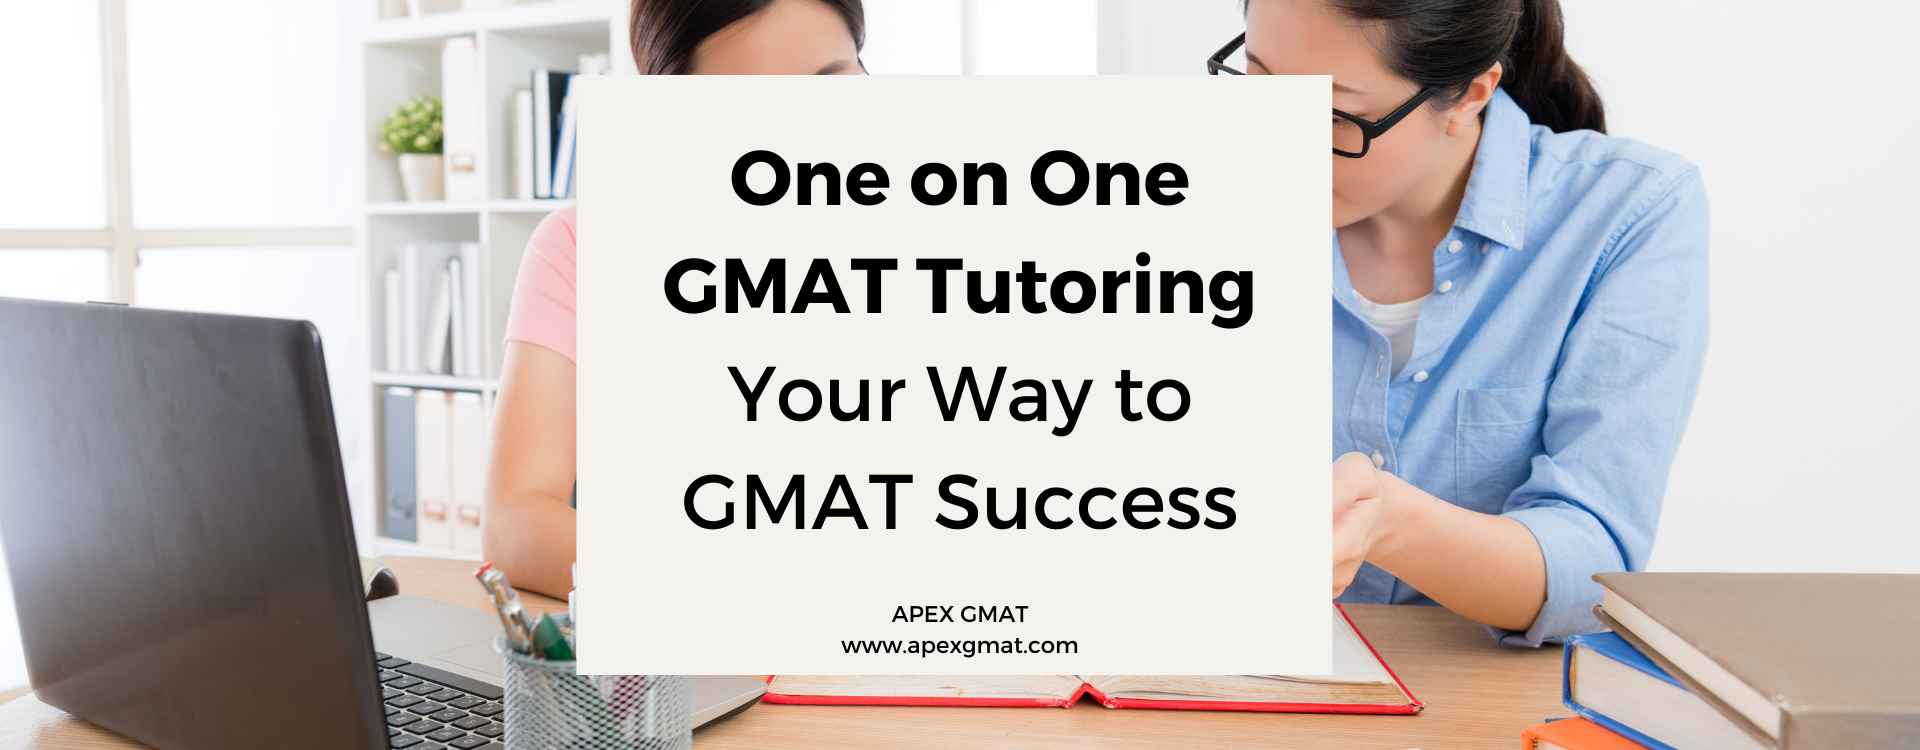 One on One GMAT Tutoring Your Way to GMAT Success